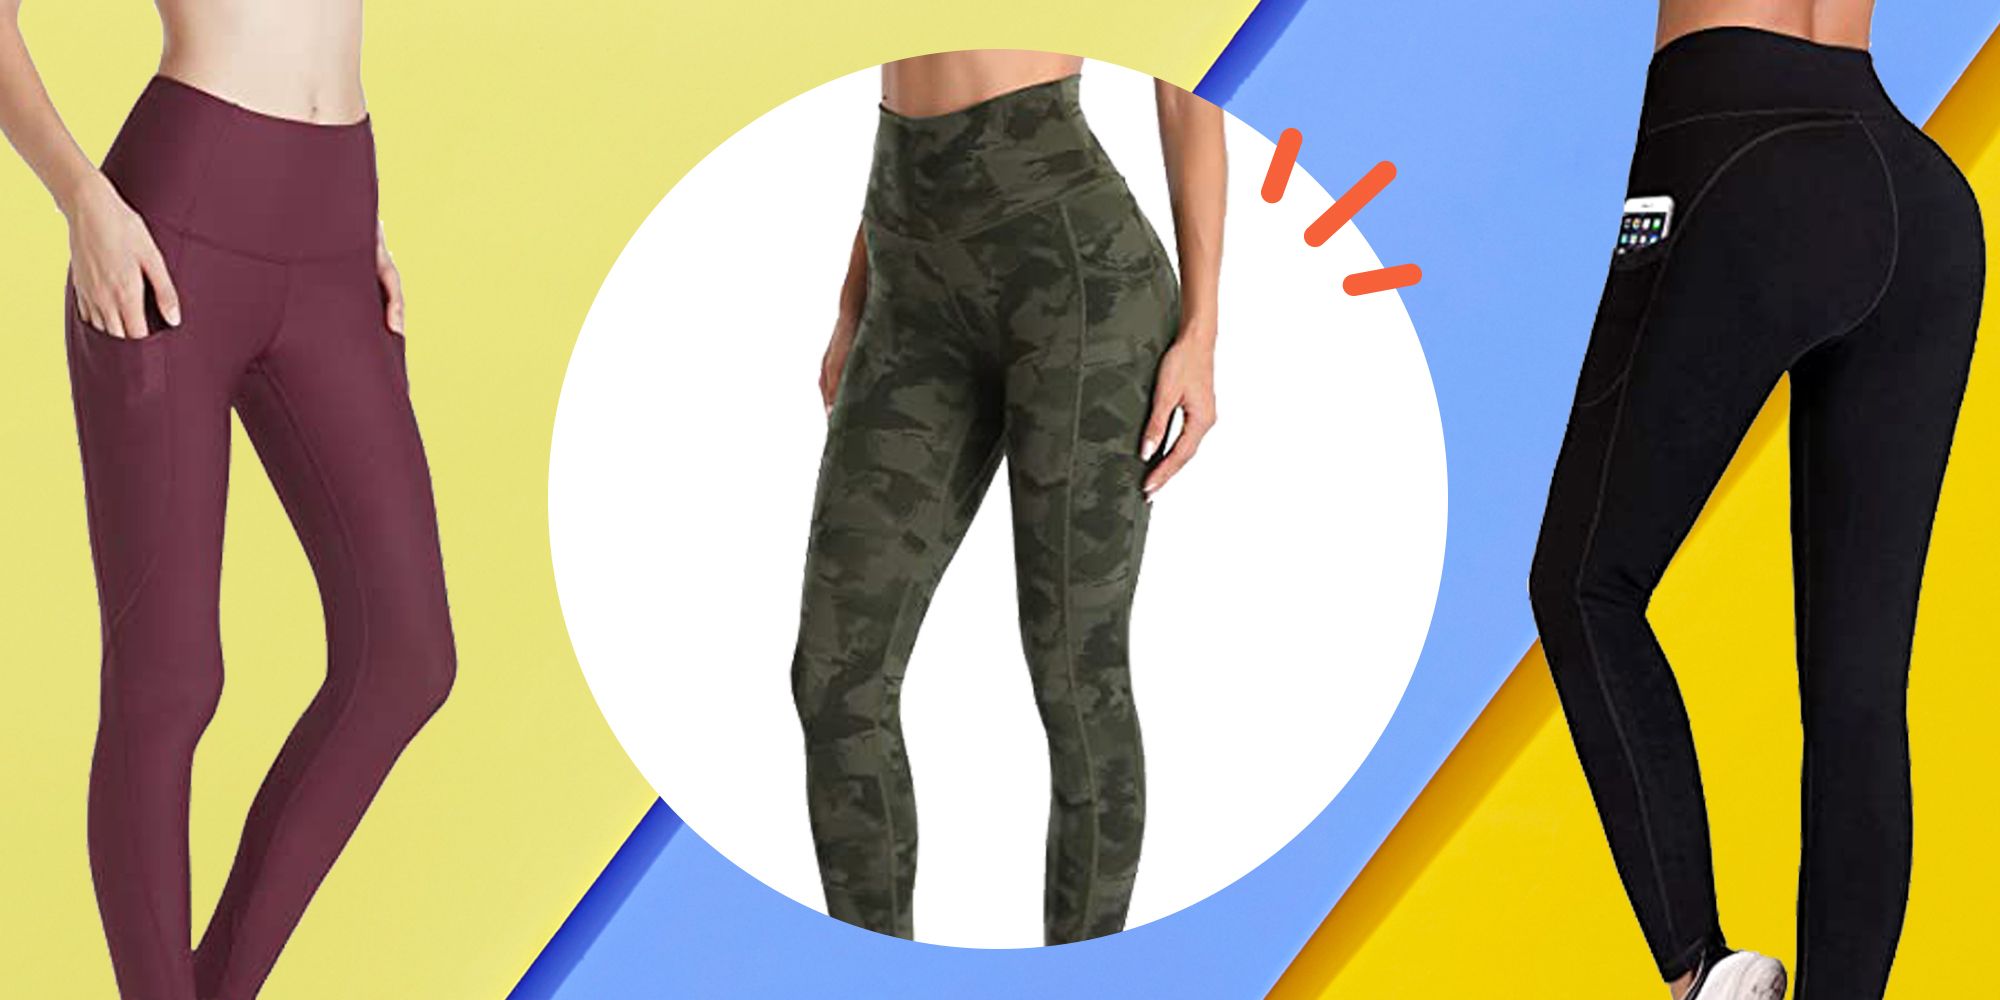 UUE Workout Leggings with Pockets for Women 19-28 Butt Lifting Gym Yoga Pants High Waisted Women's Leggings Tummy Control 